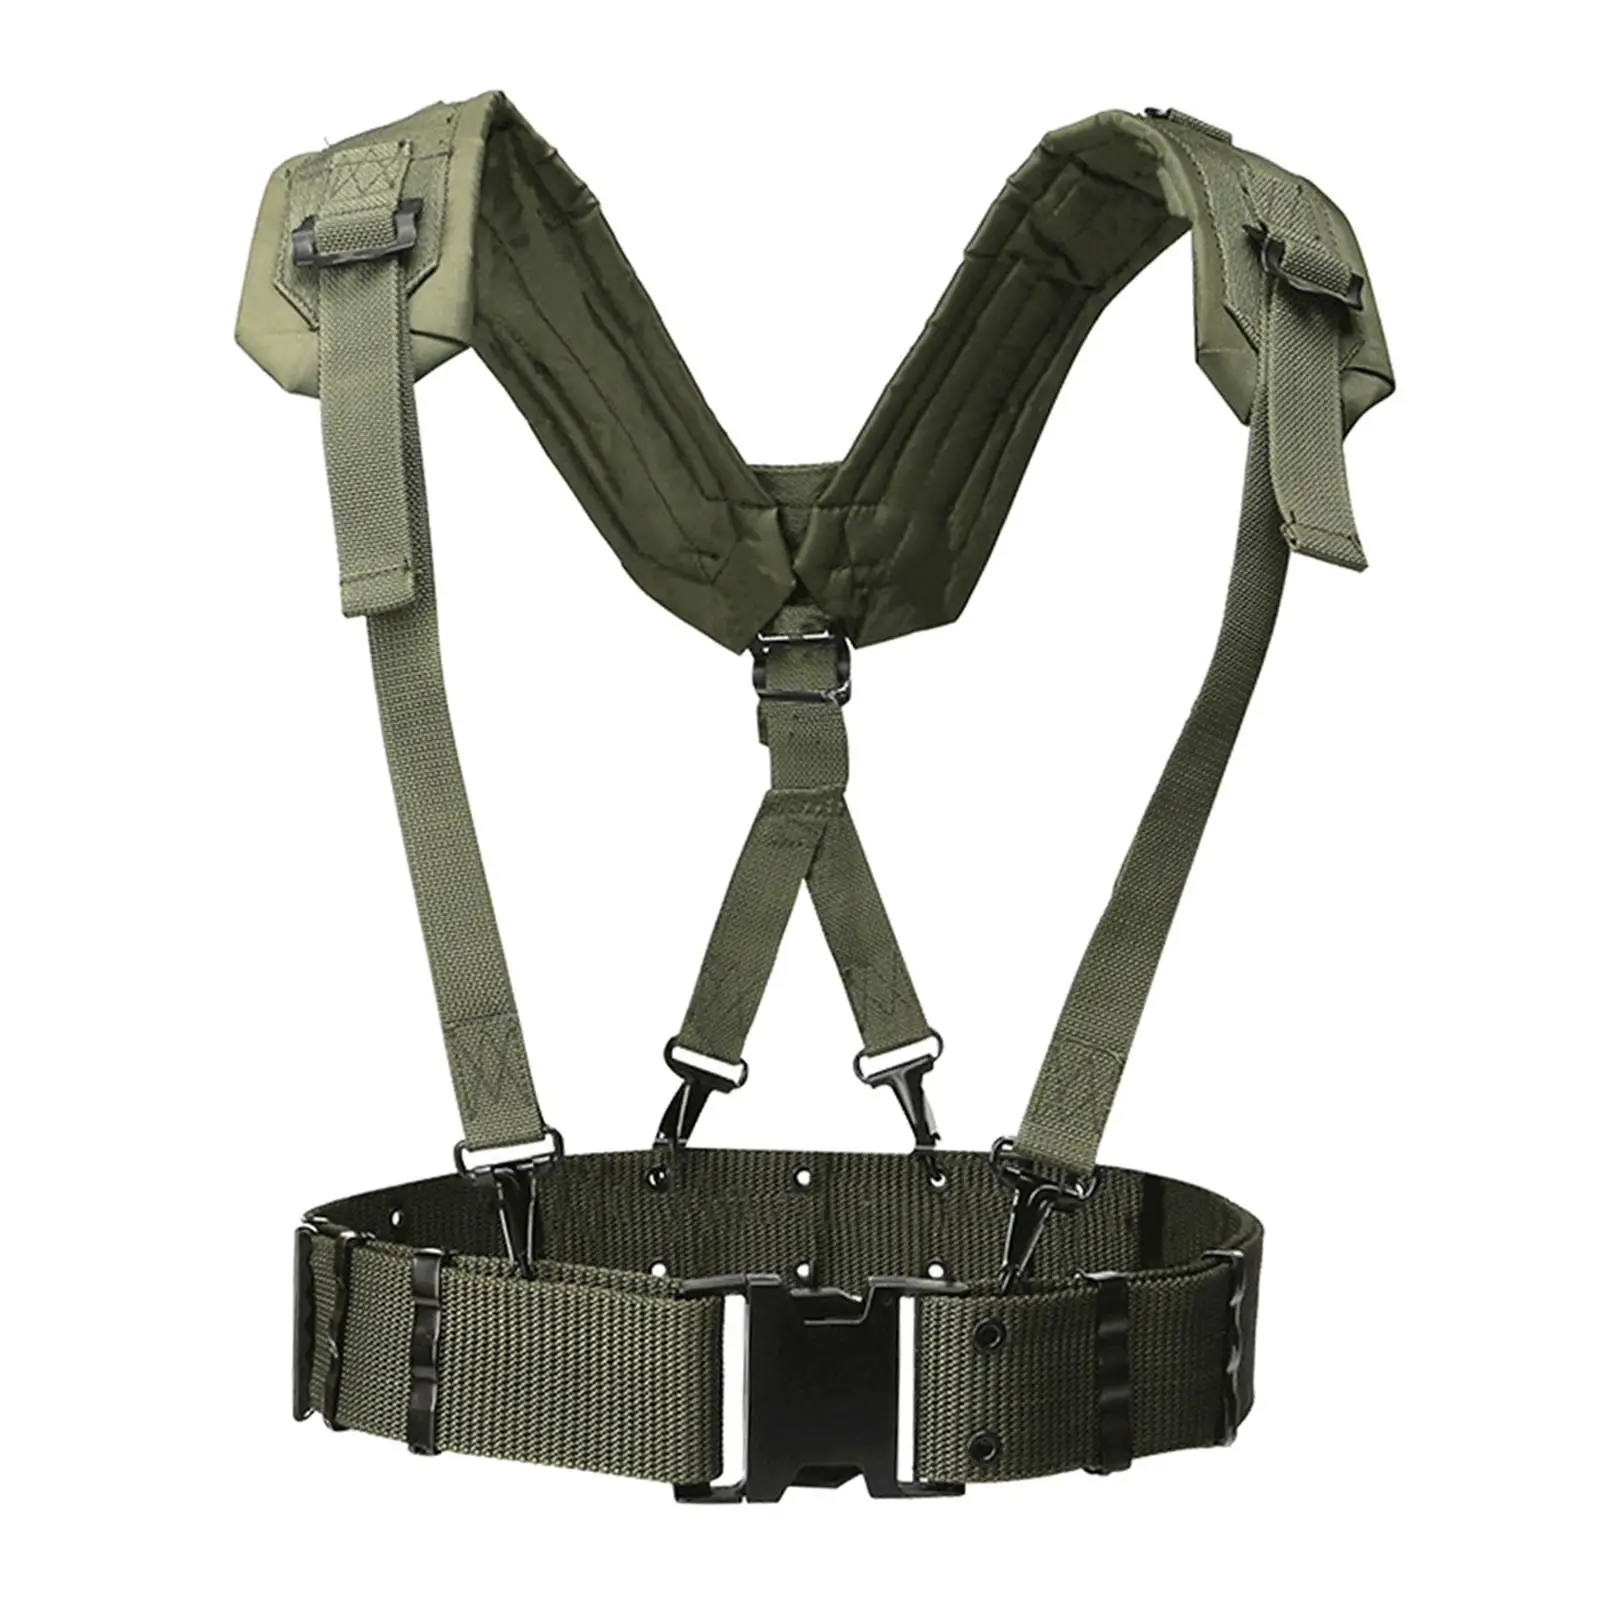 Y Shaped Suspenders Tool Durable Nylon Suspenders for Outdoor Travel Hiking